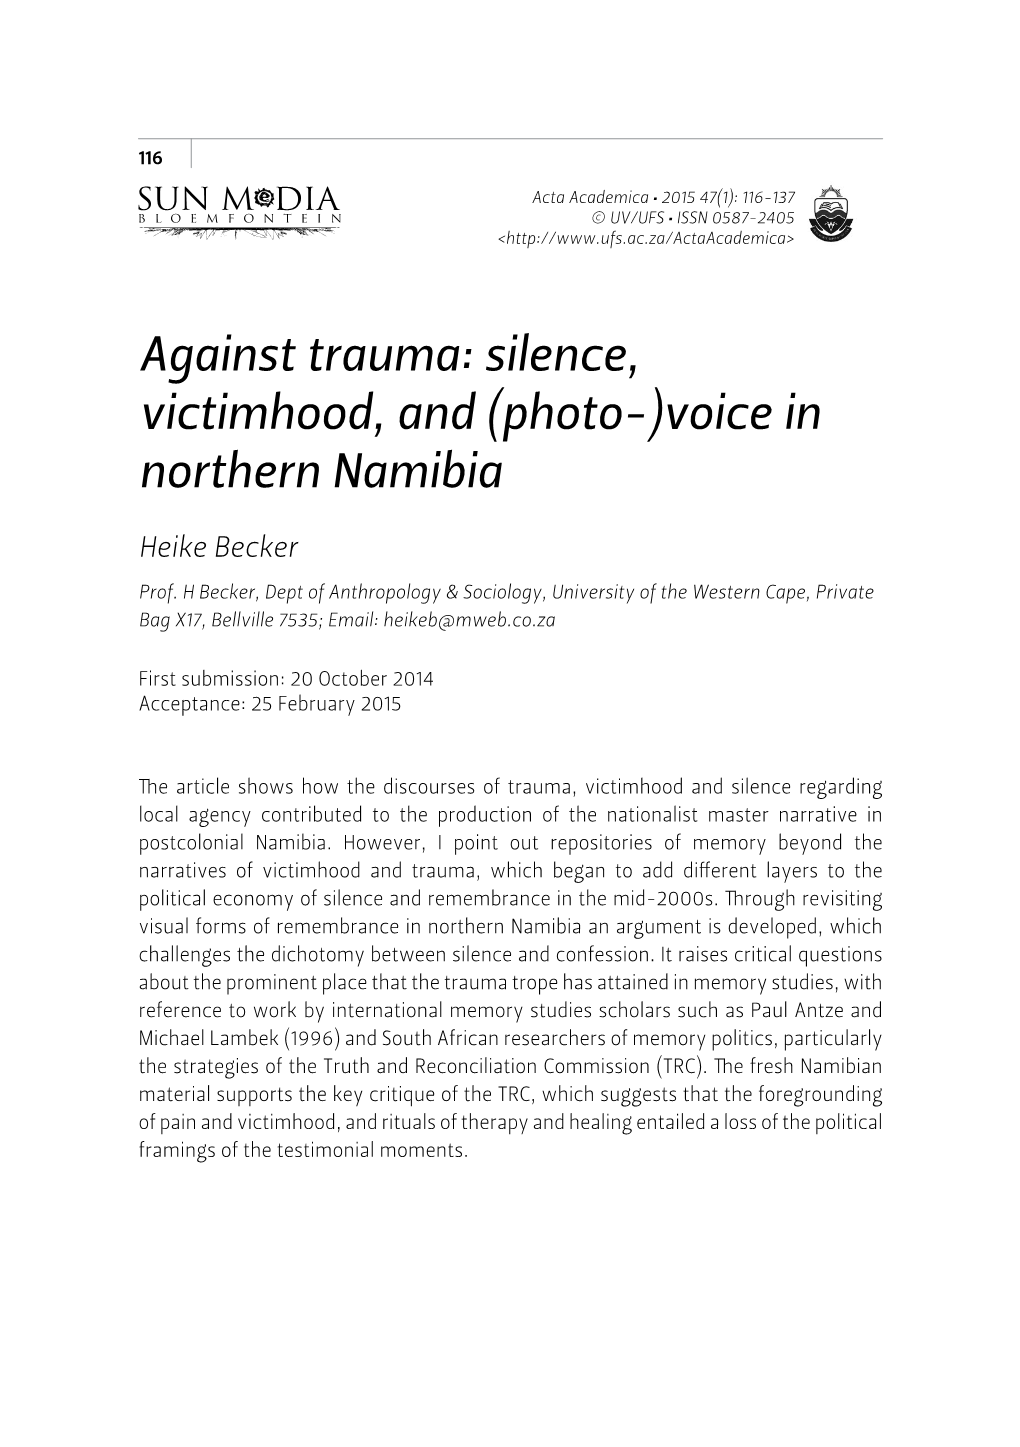 Against Trauma: Silence, Victimhood, and (Photo-)Voice in Northern Namibia